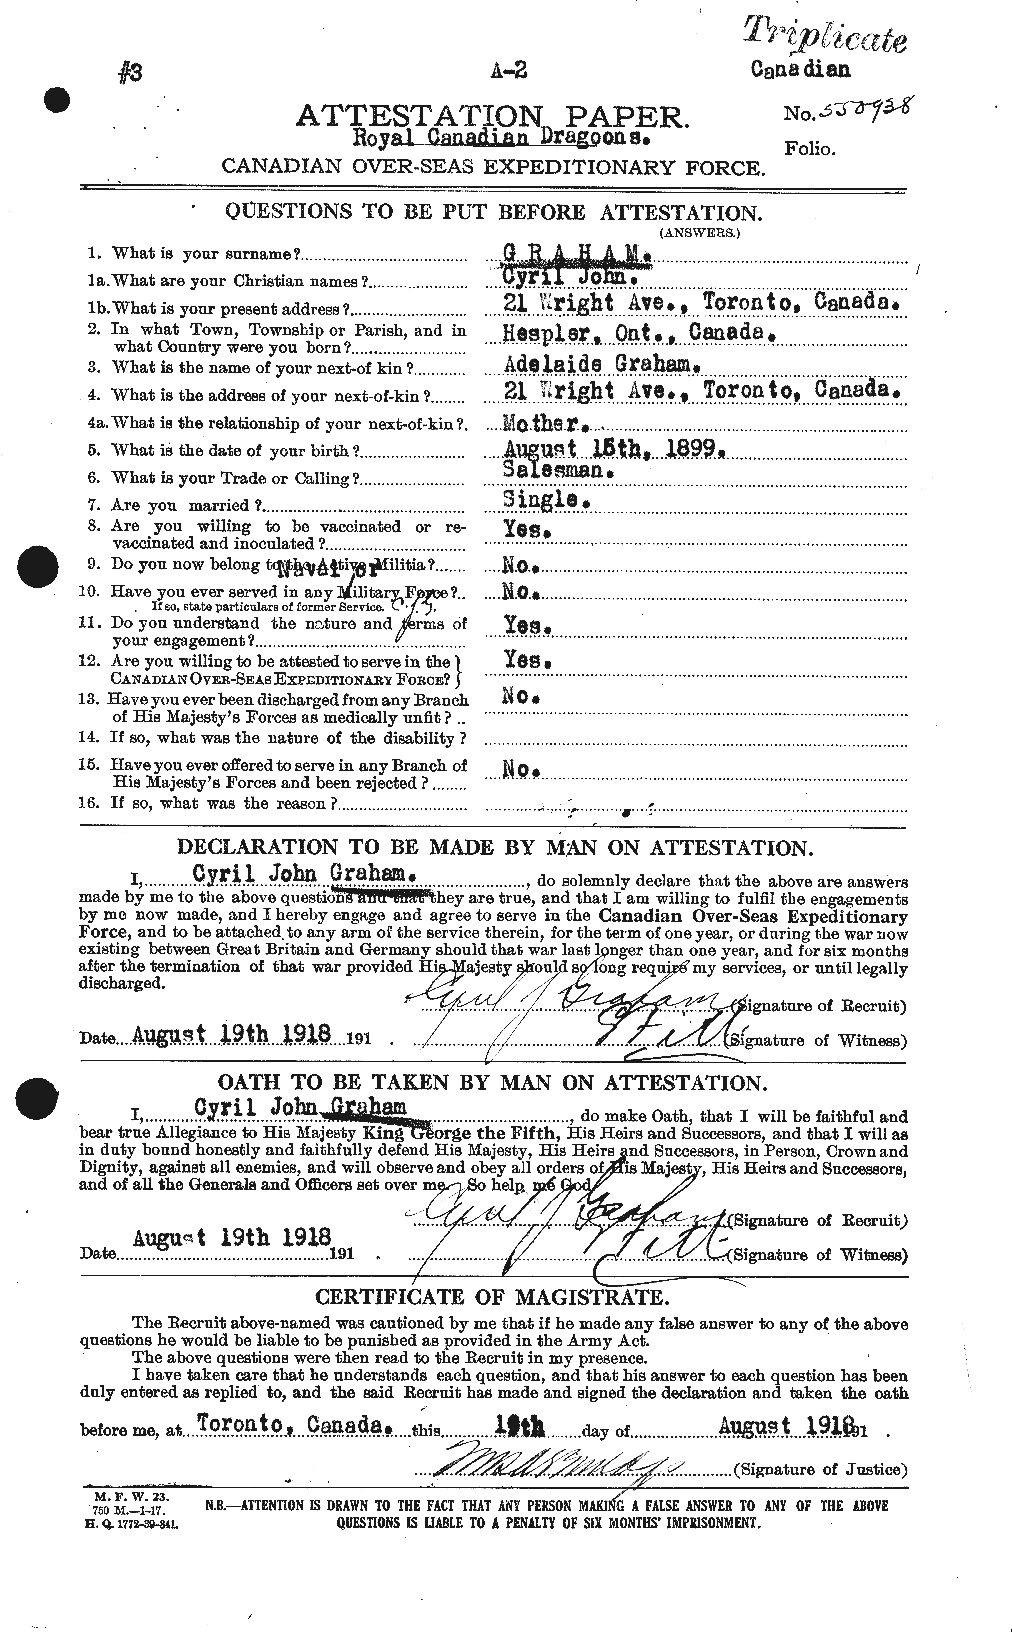 Personnel Records of the First World War - CEF 353806a